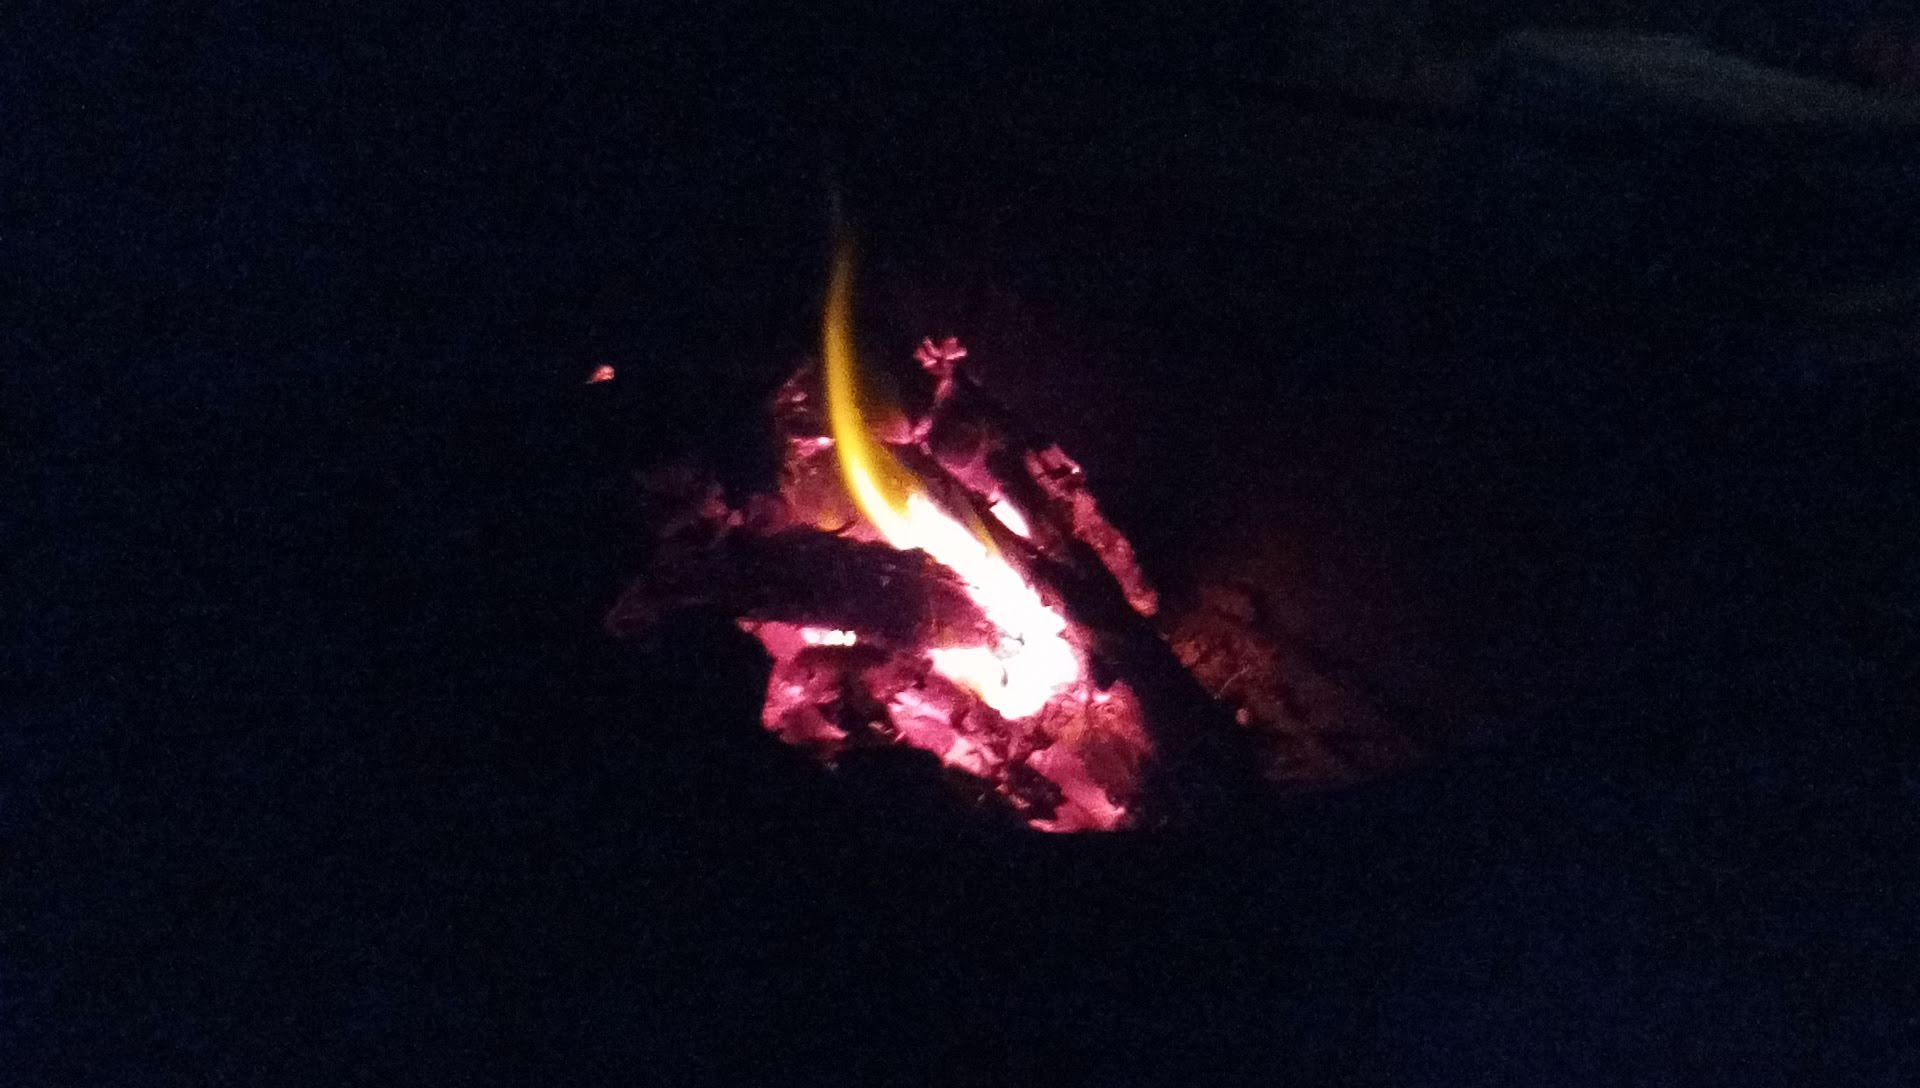 Watching the fire is calming and soothing